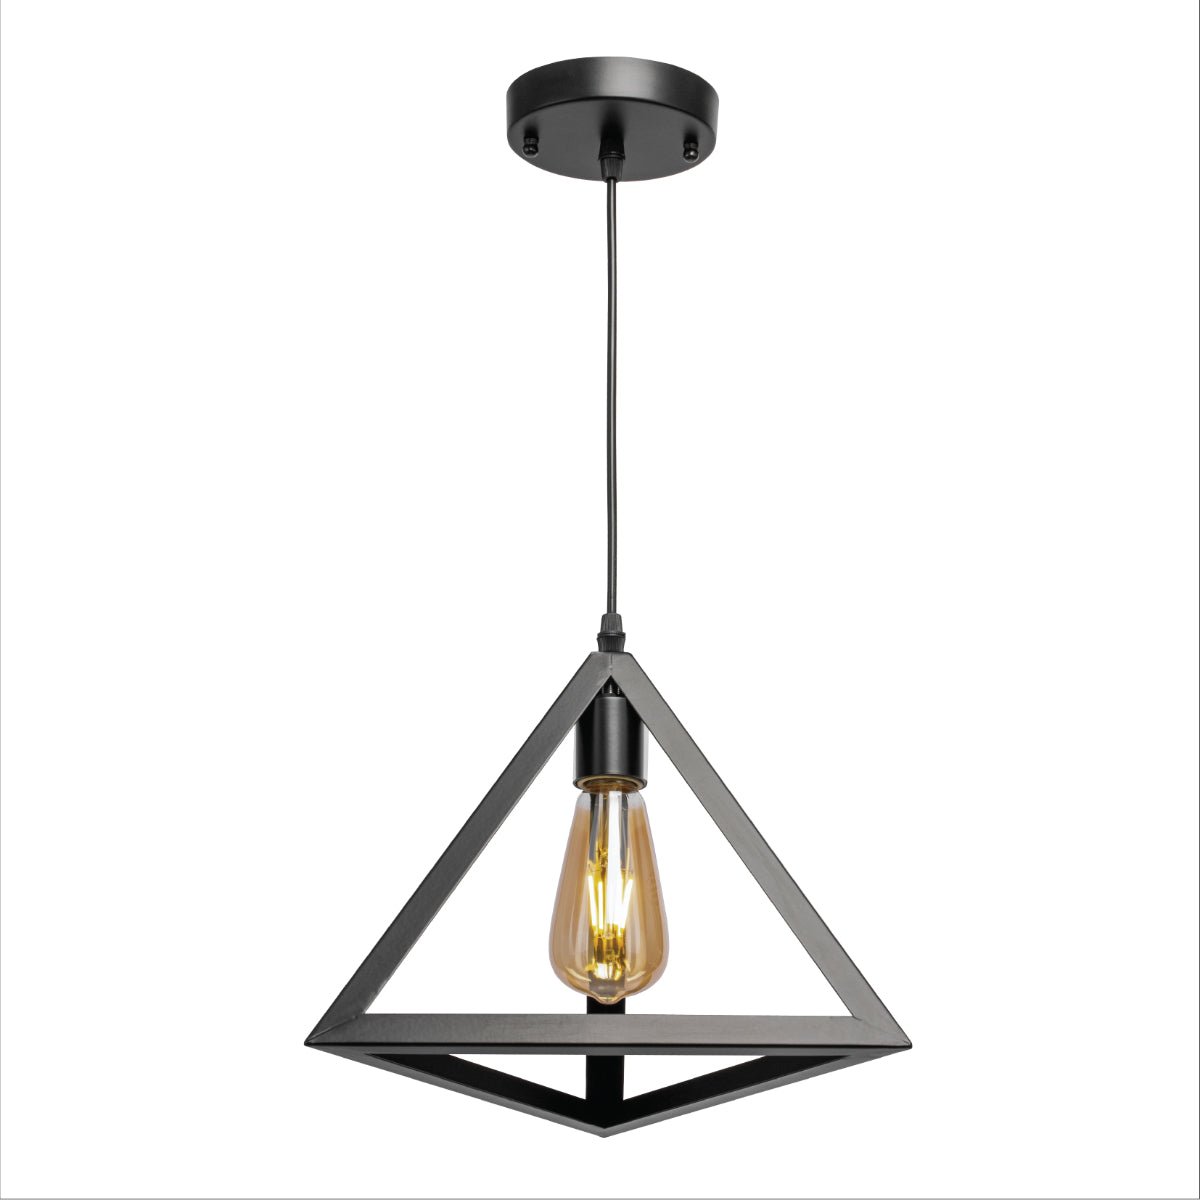 Main image of Black Metal Pyramid Cage Pendant Ceiling Light with E27 | TEKLED 150-17948